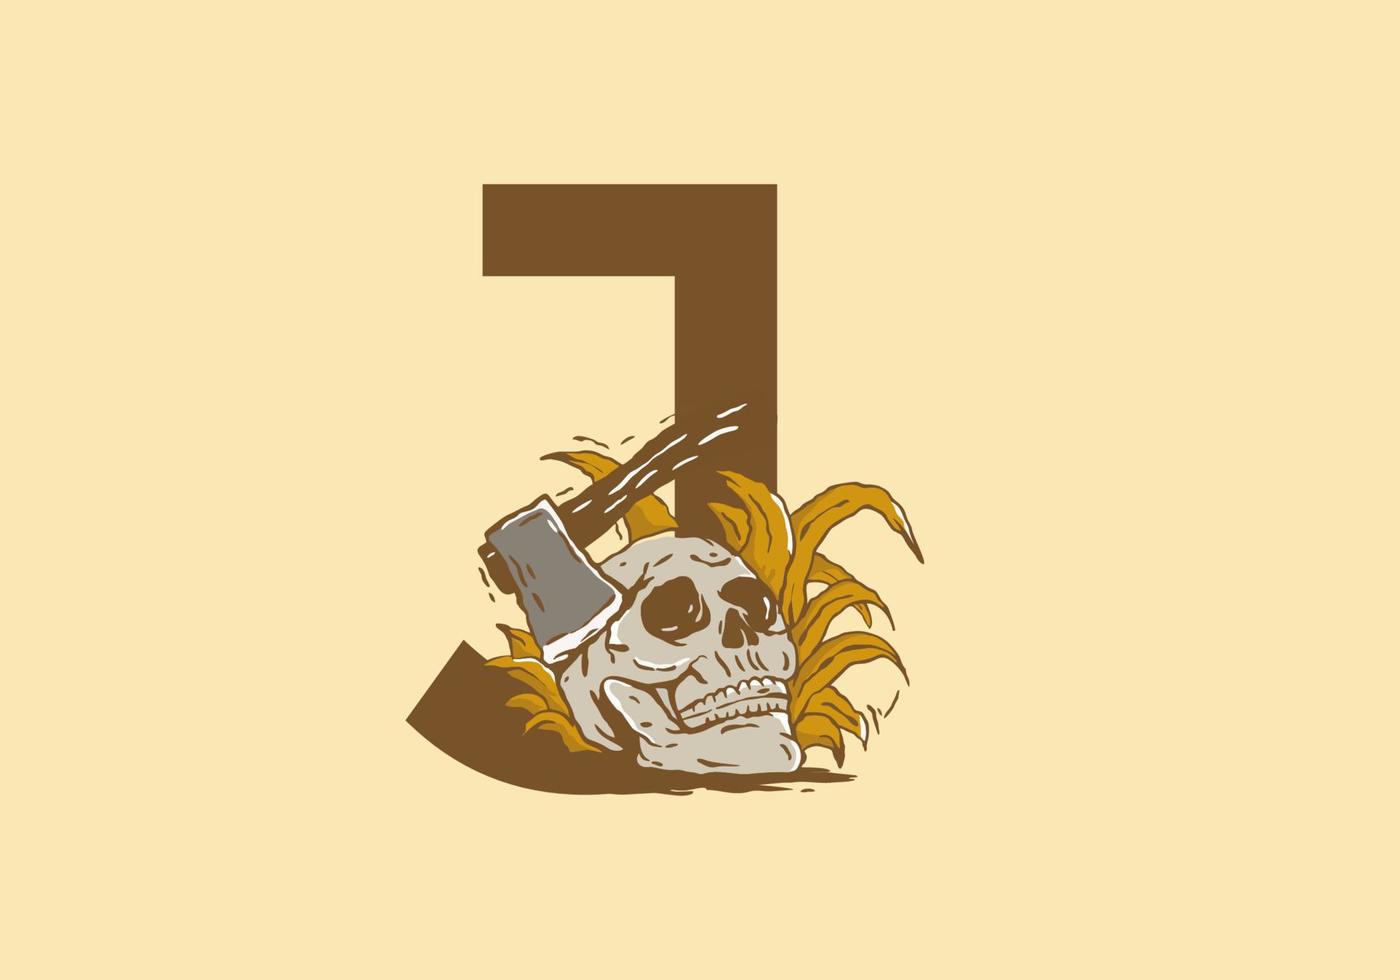 Skeleton head and ax illustration drawing with J initial letter vector